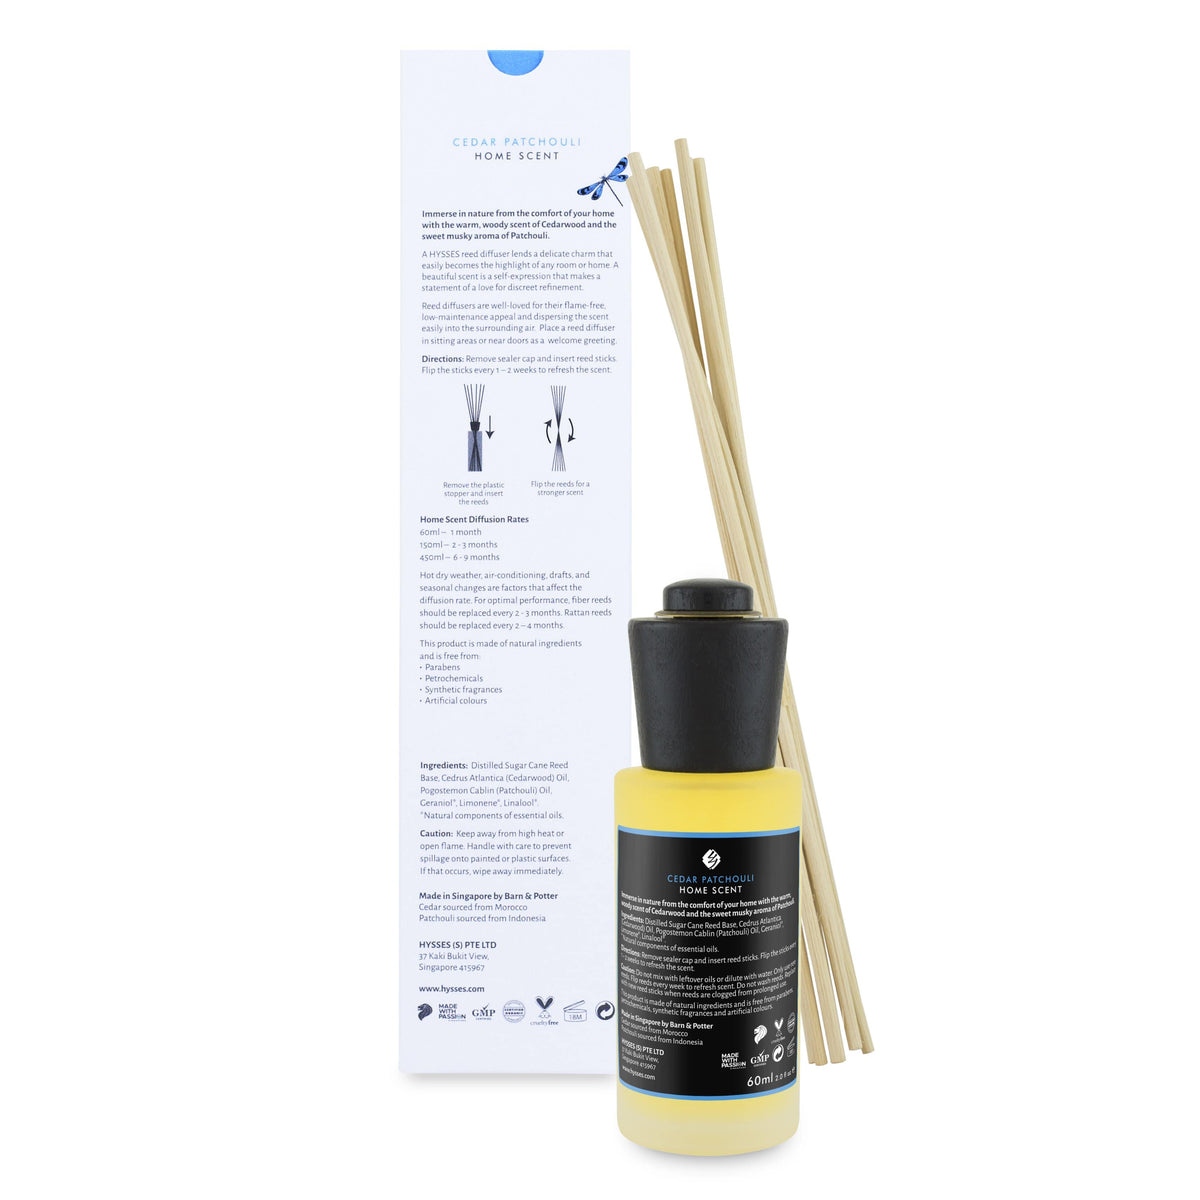 Hysses Home Scents Home Scent Reed Diffuser Cedar Patchouli